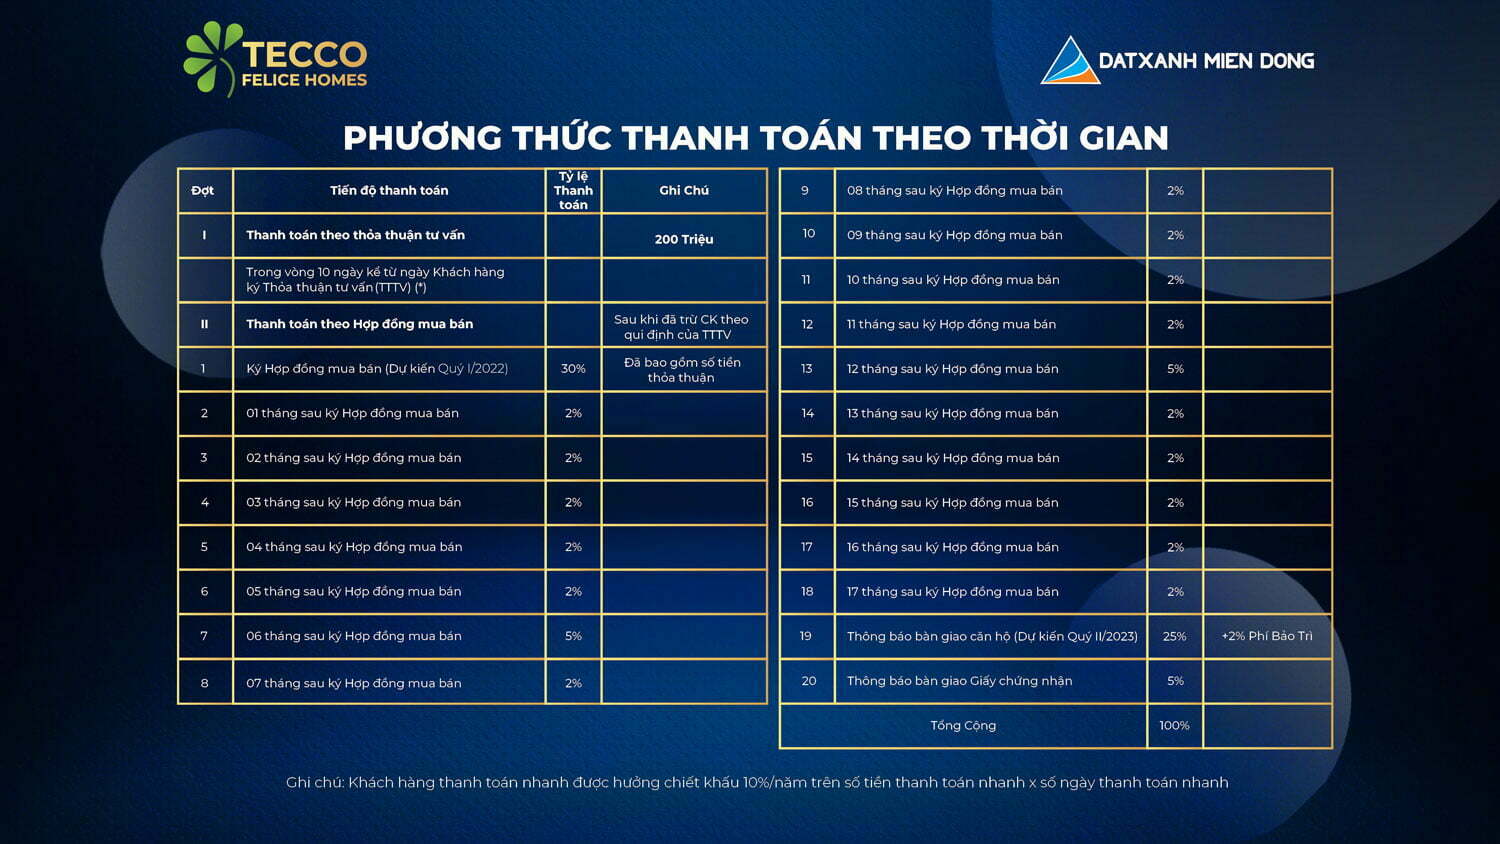 lich thanh toan 2 tecco felice homes